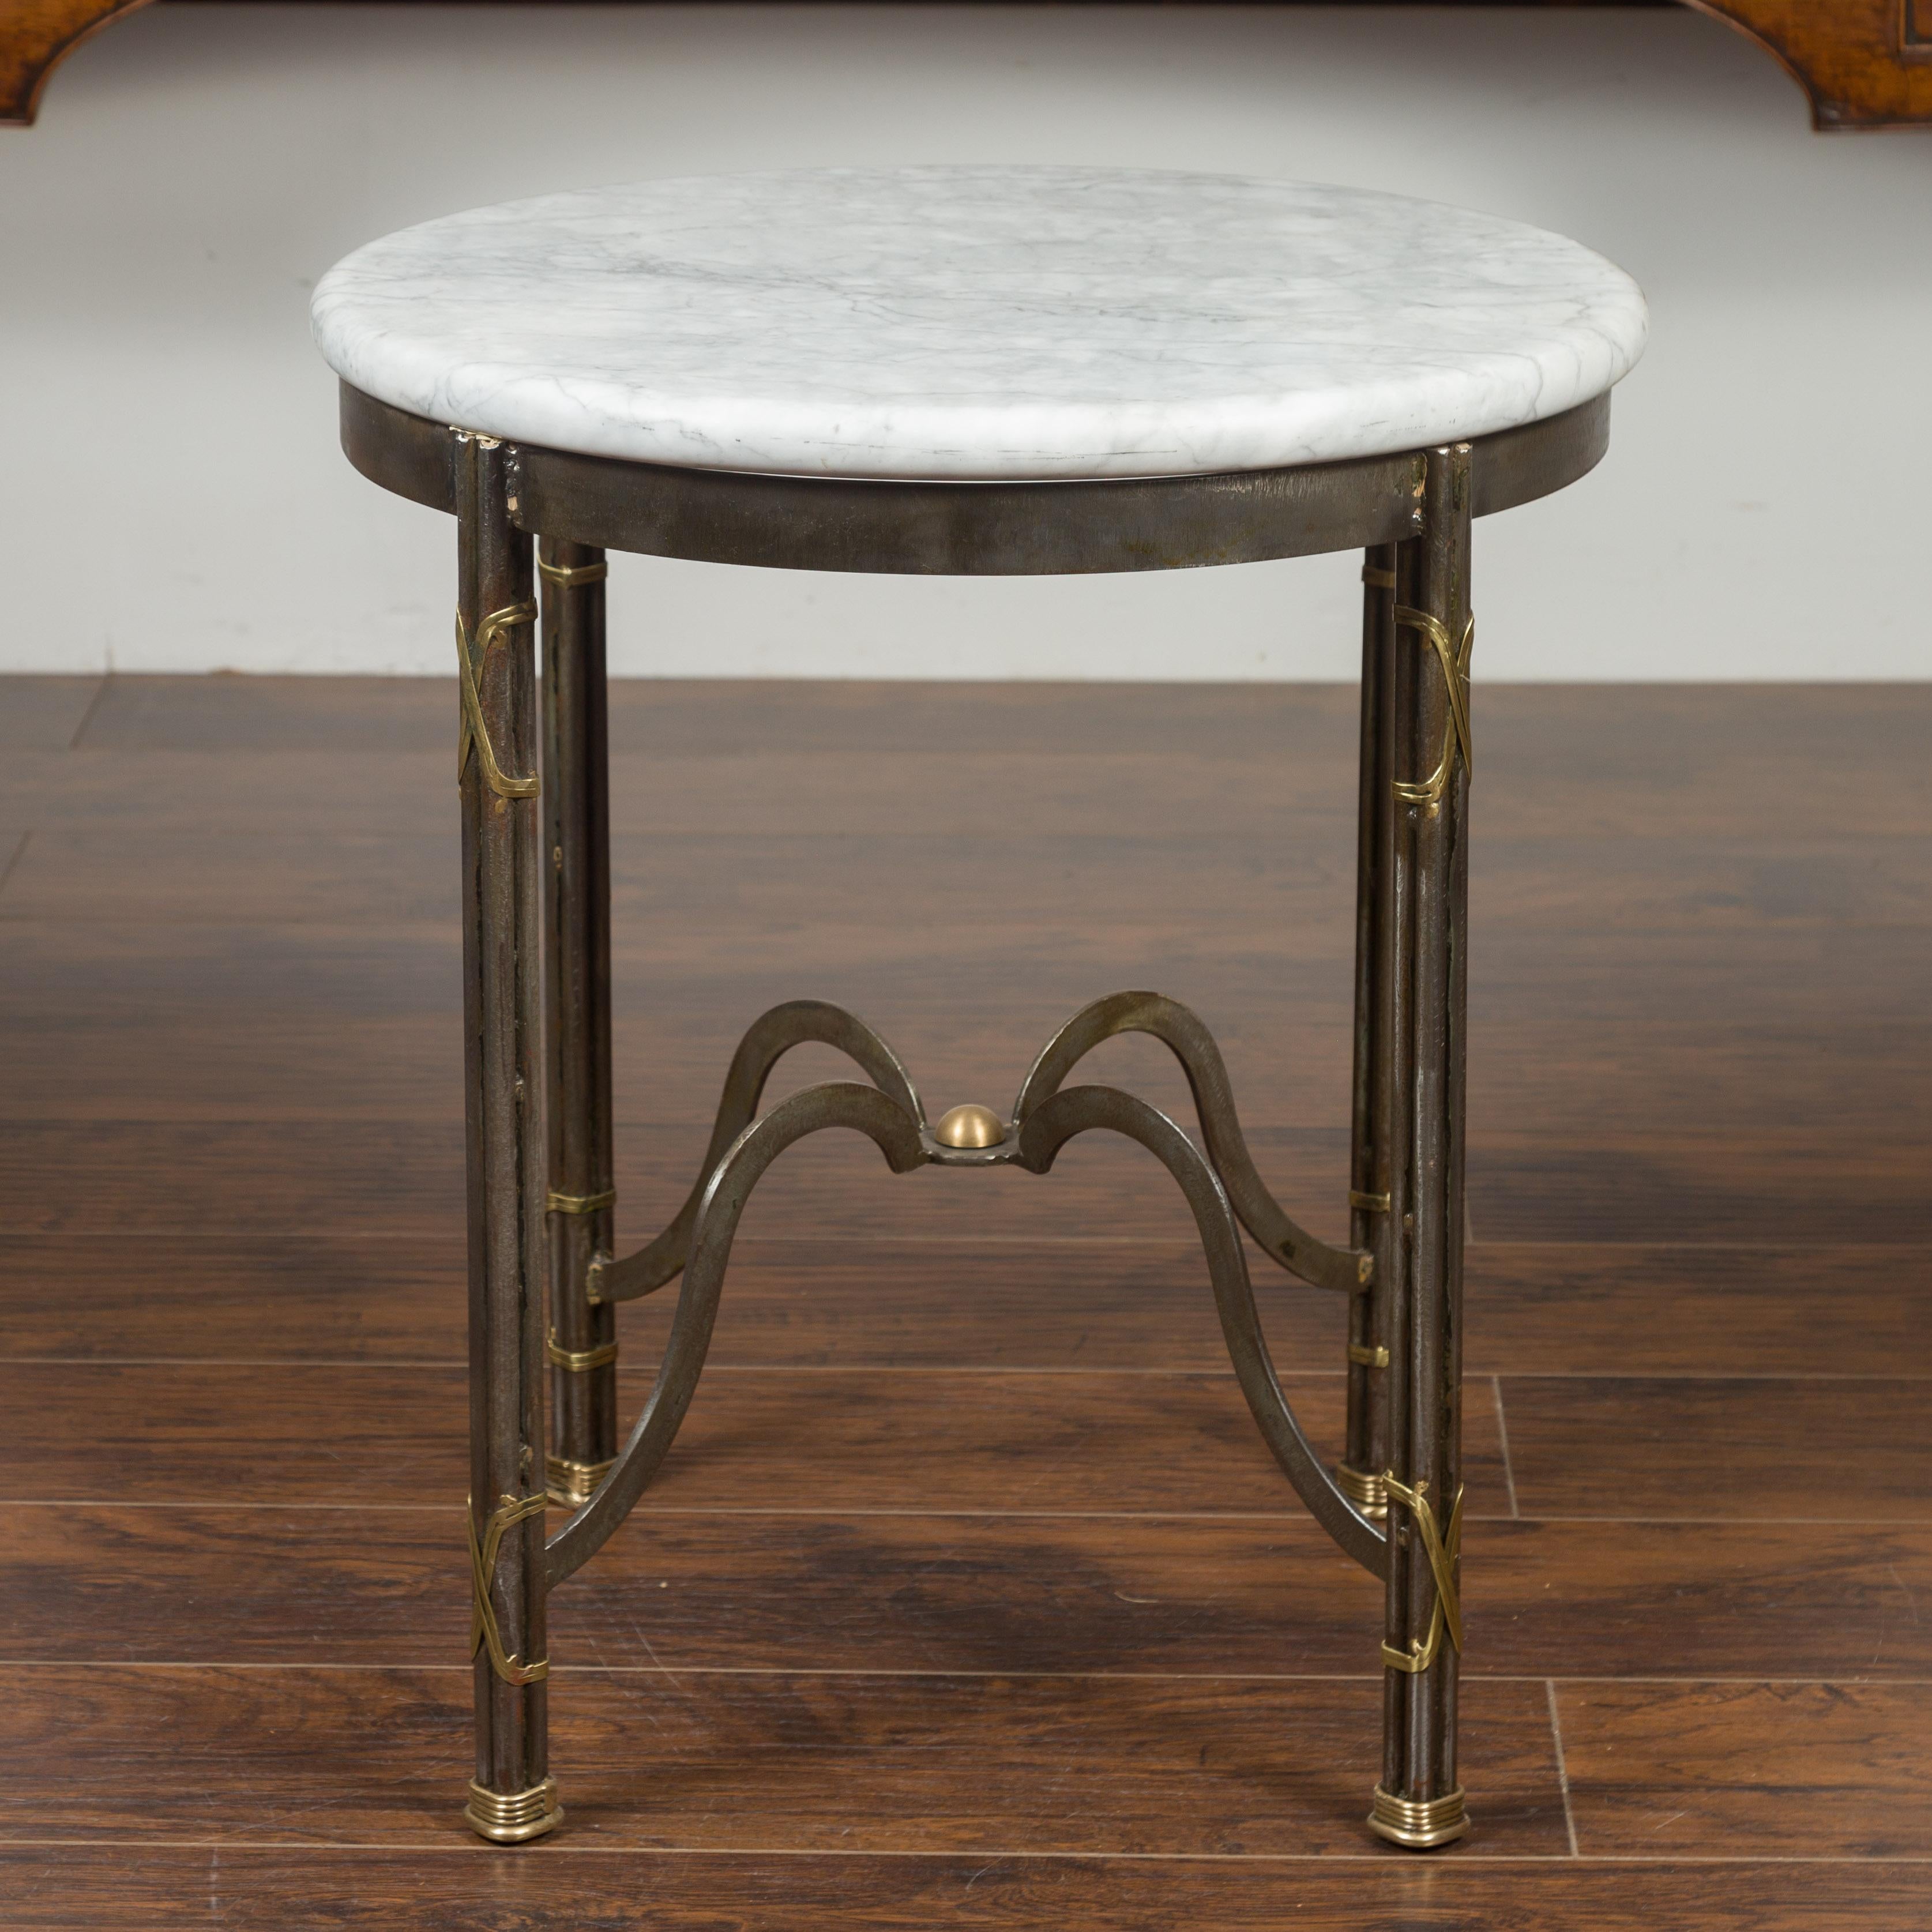 A vintage French polished steel side table from the mid-20th century, with circular white marble top and brass accents. Created in France during the midcentury period, this side table features a round white veined marble top, sitting above an